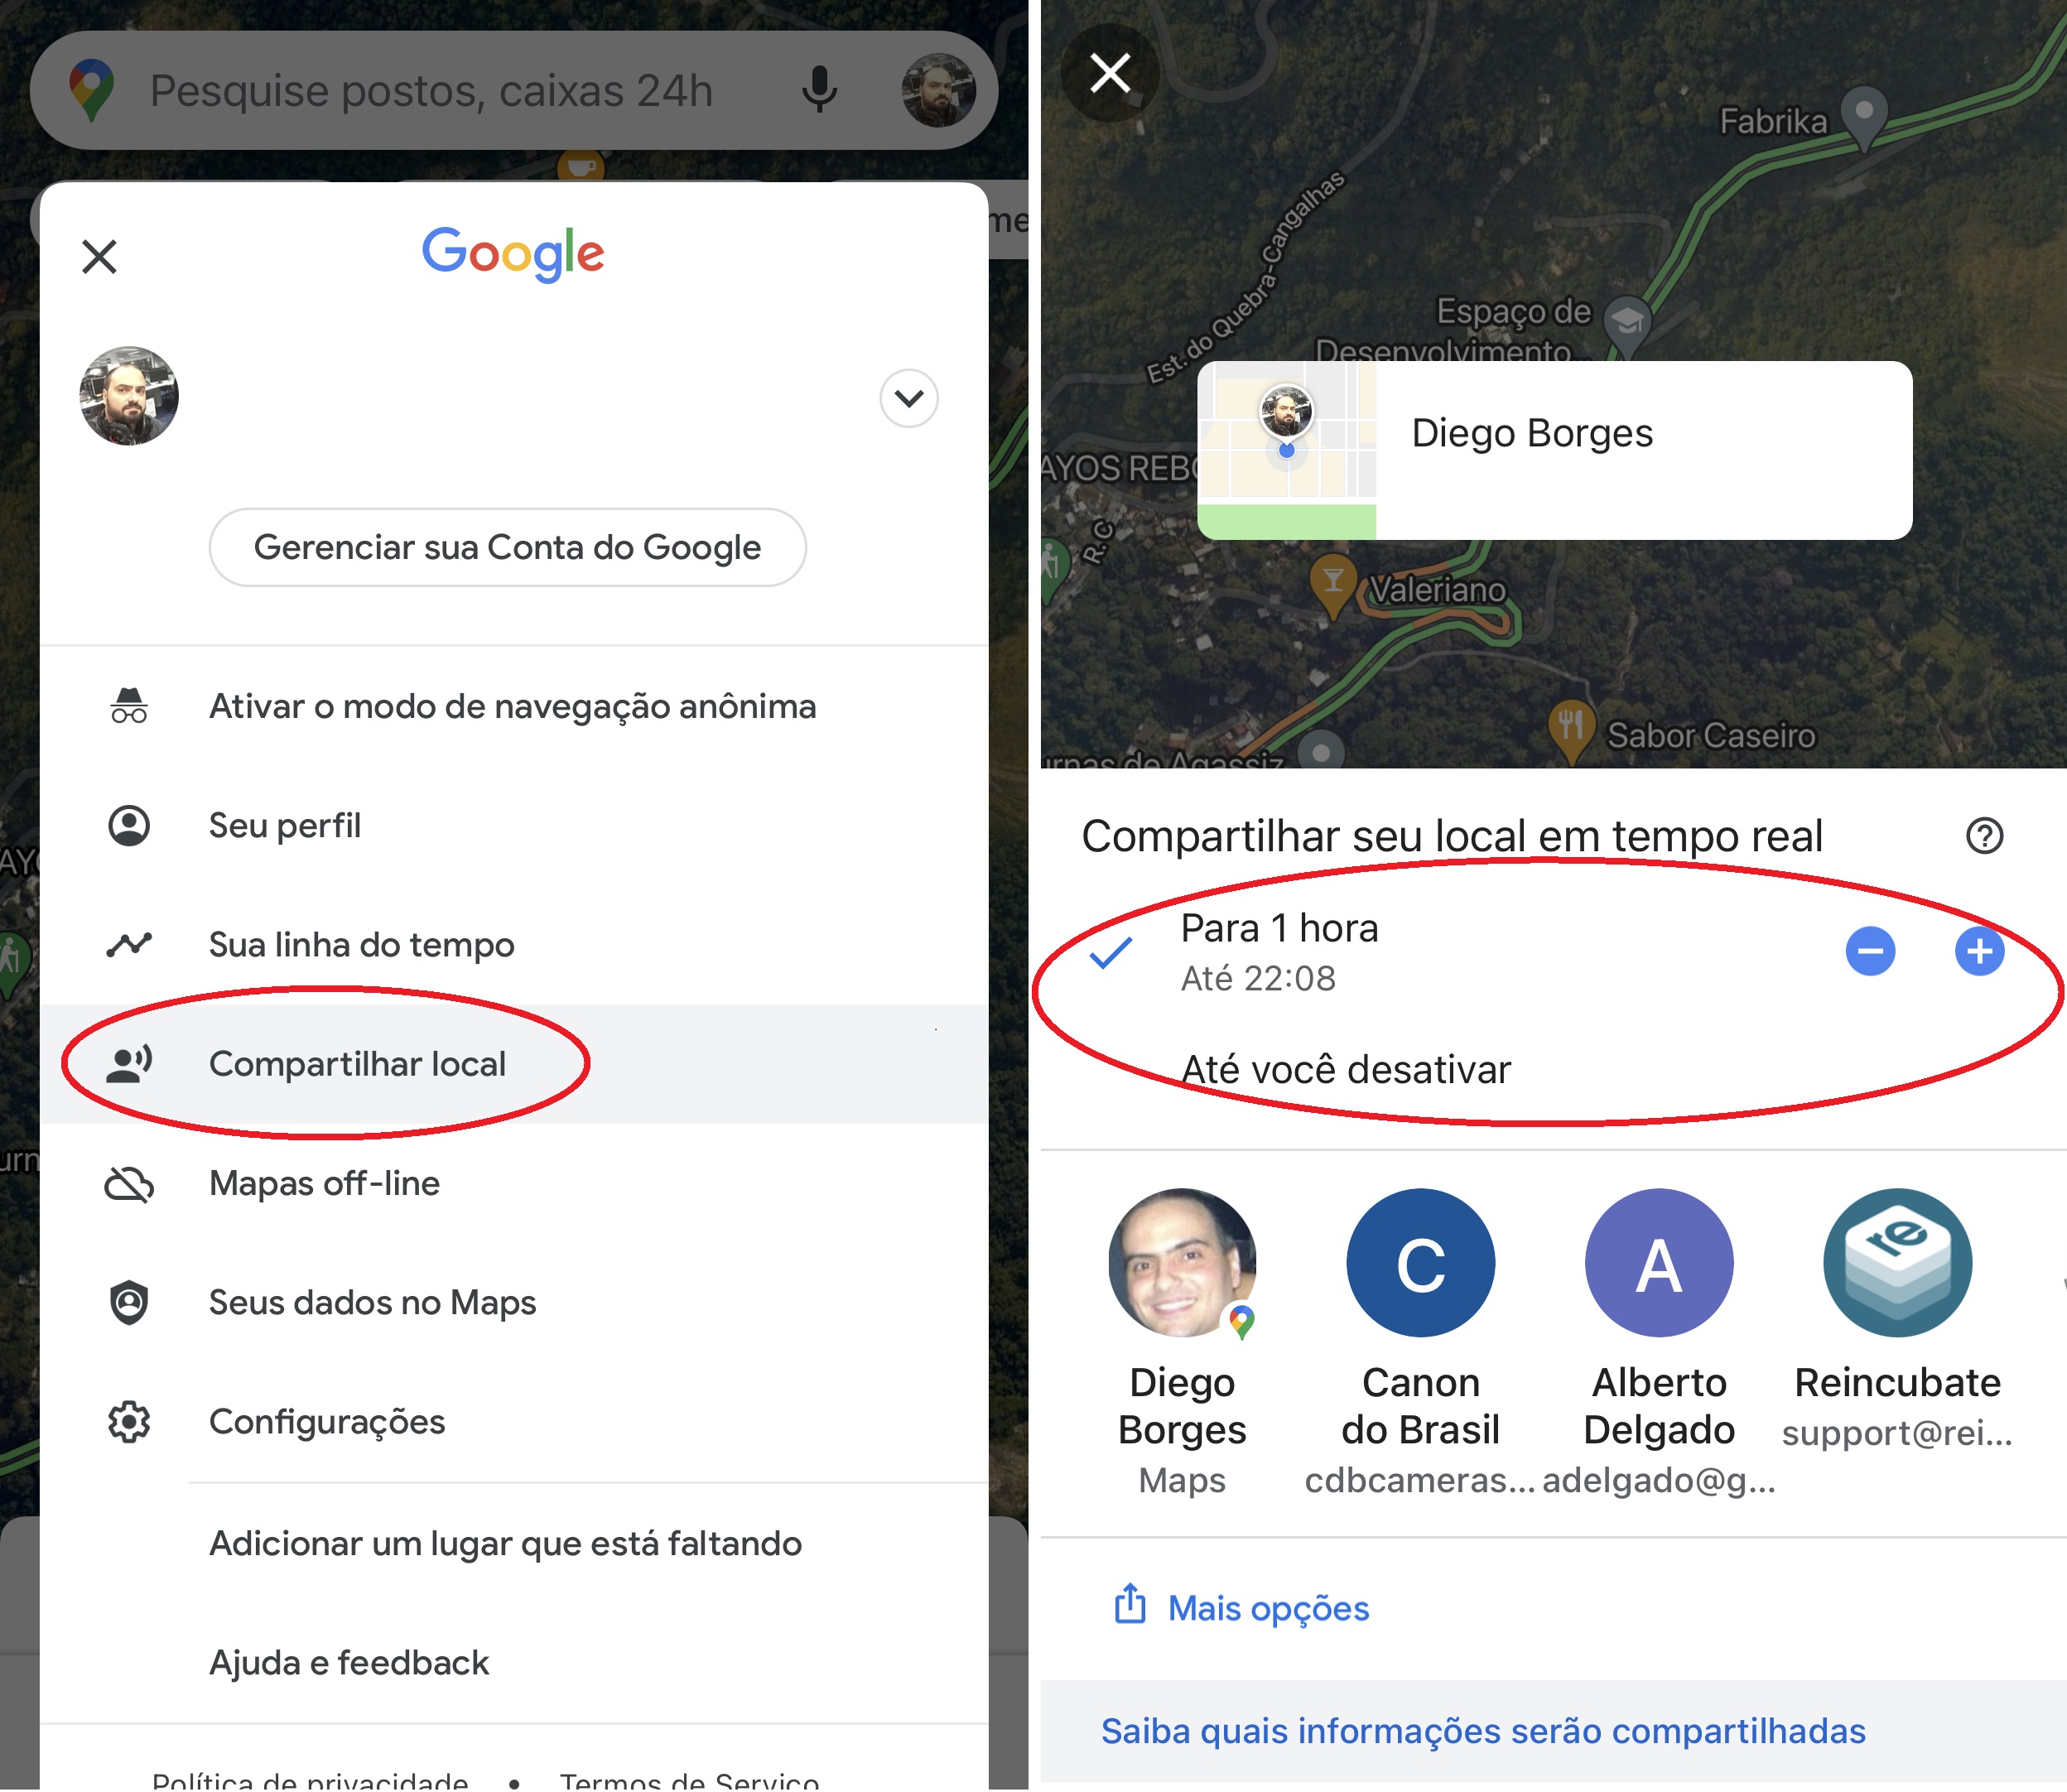 Google maps lets you choose how long you want to share your location with someone